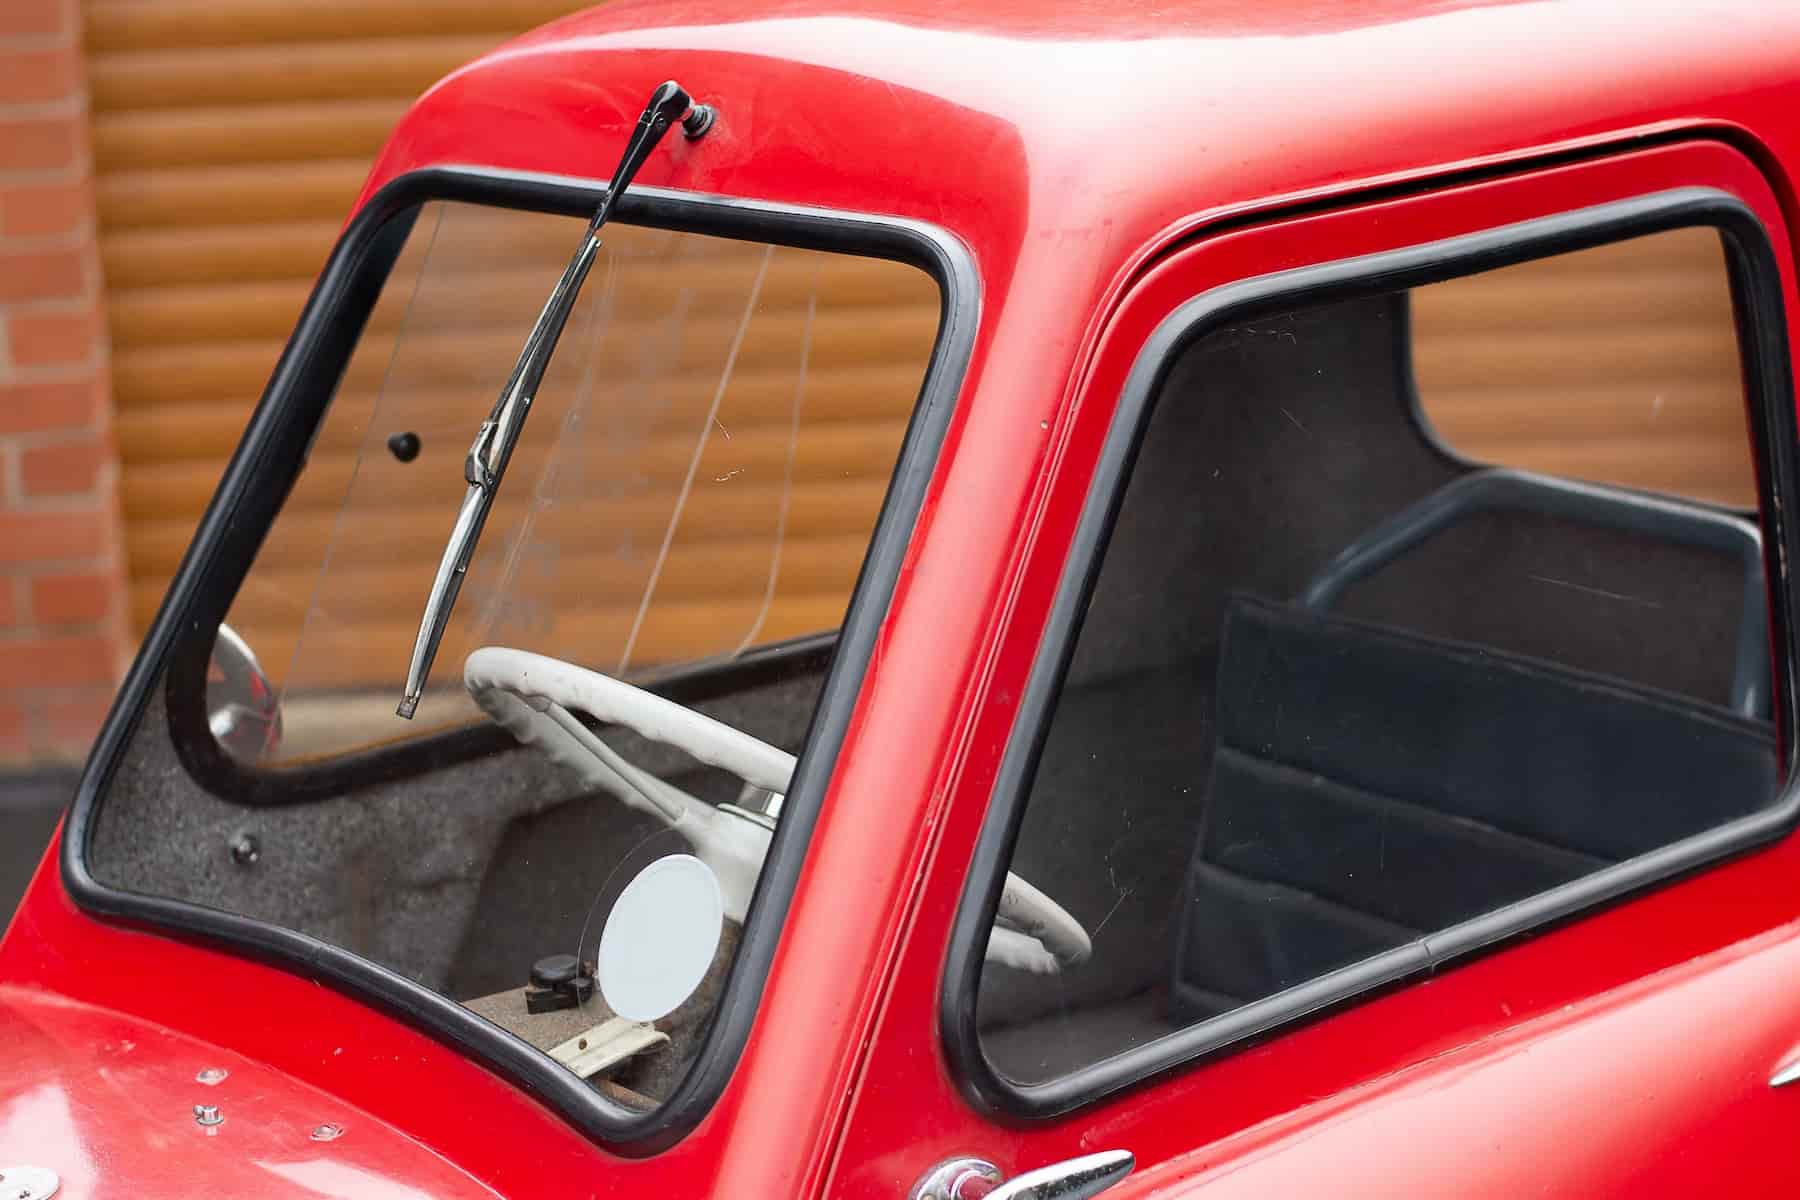 rare 1963 peel p50 microcar sells for a whopping 145000 at auction 2